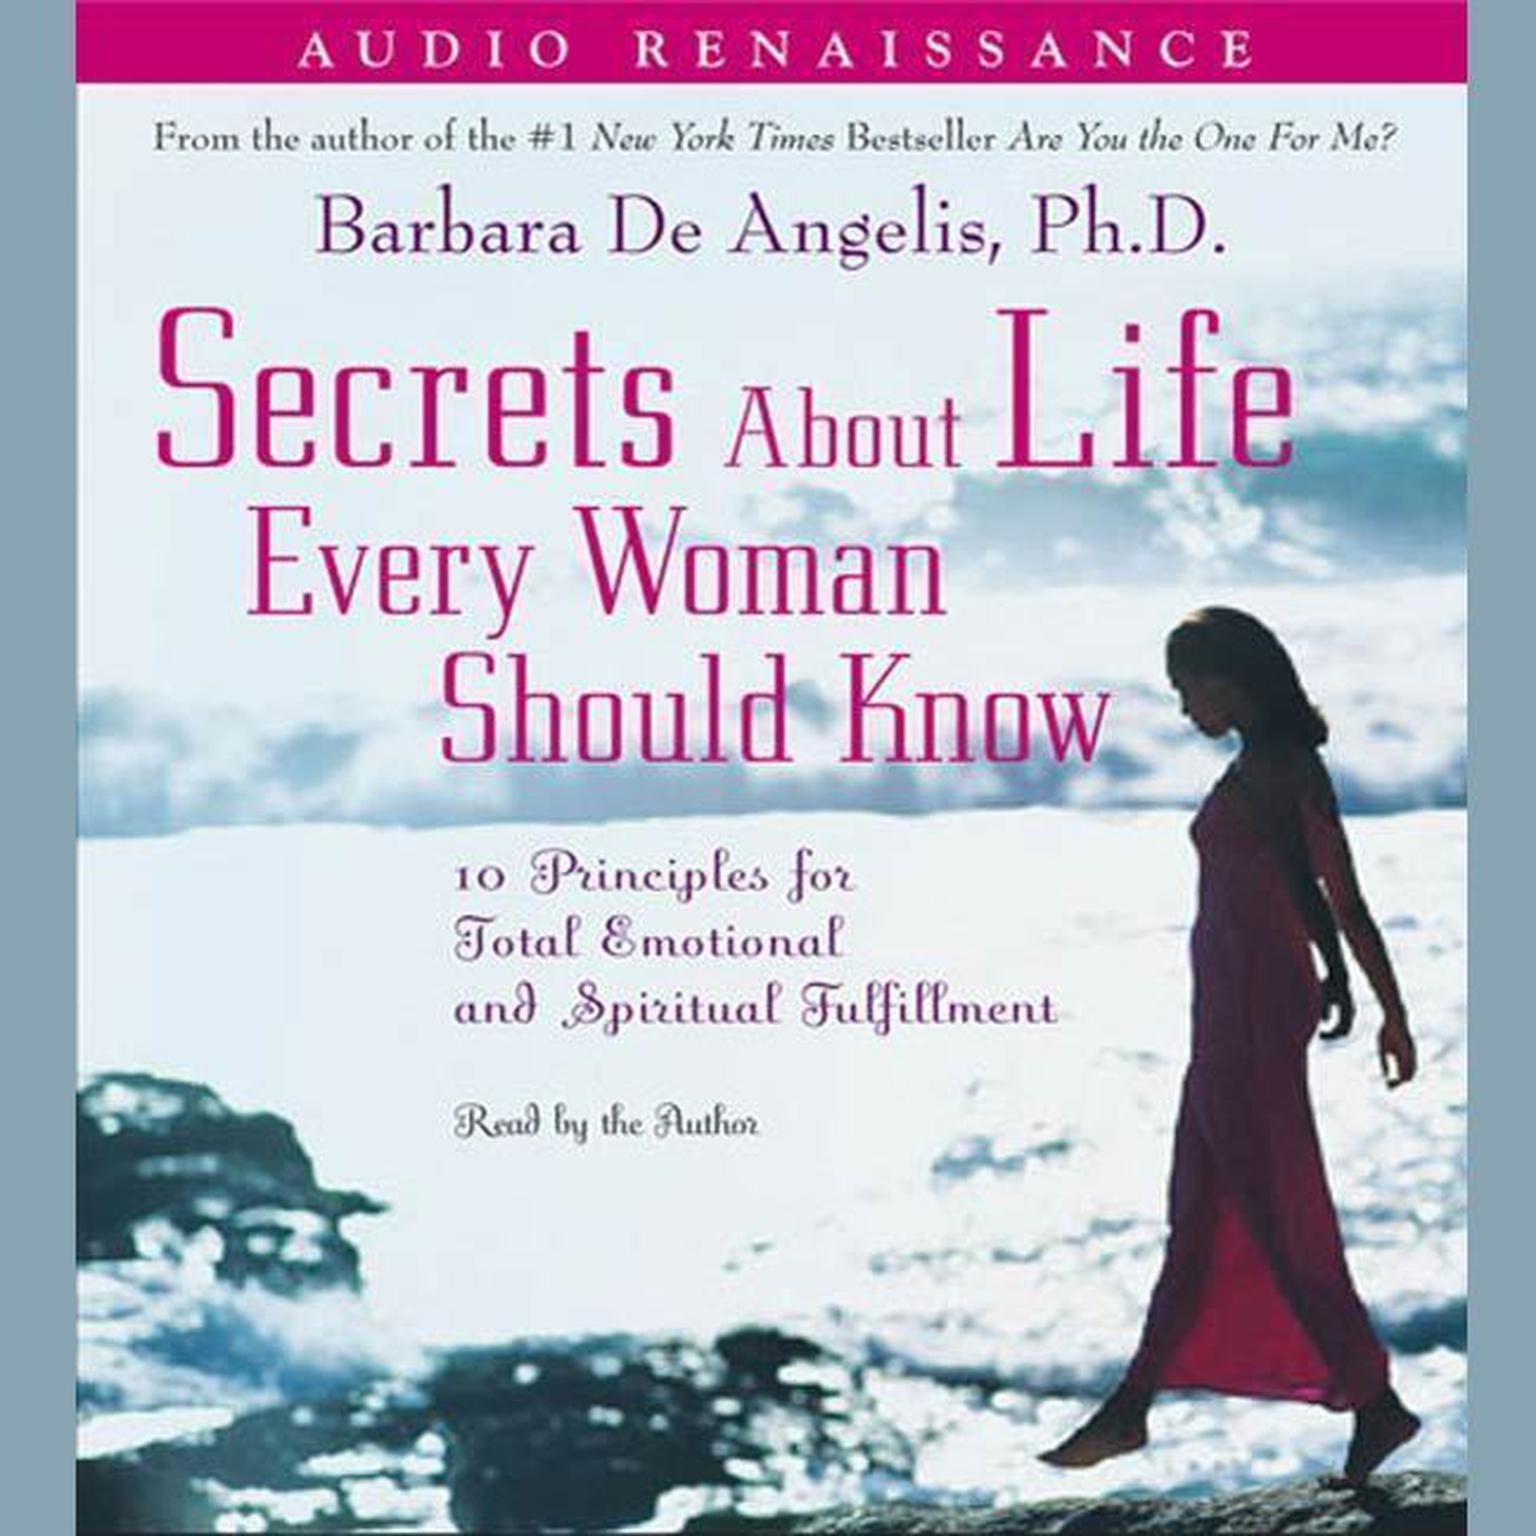 Secrets About Life Every Woman Should Know (Abridged): 10 Principles for Emotional and Spiritual Fulfillment Audiobook, by Barbara De Angelis